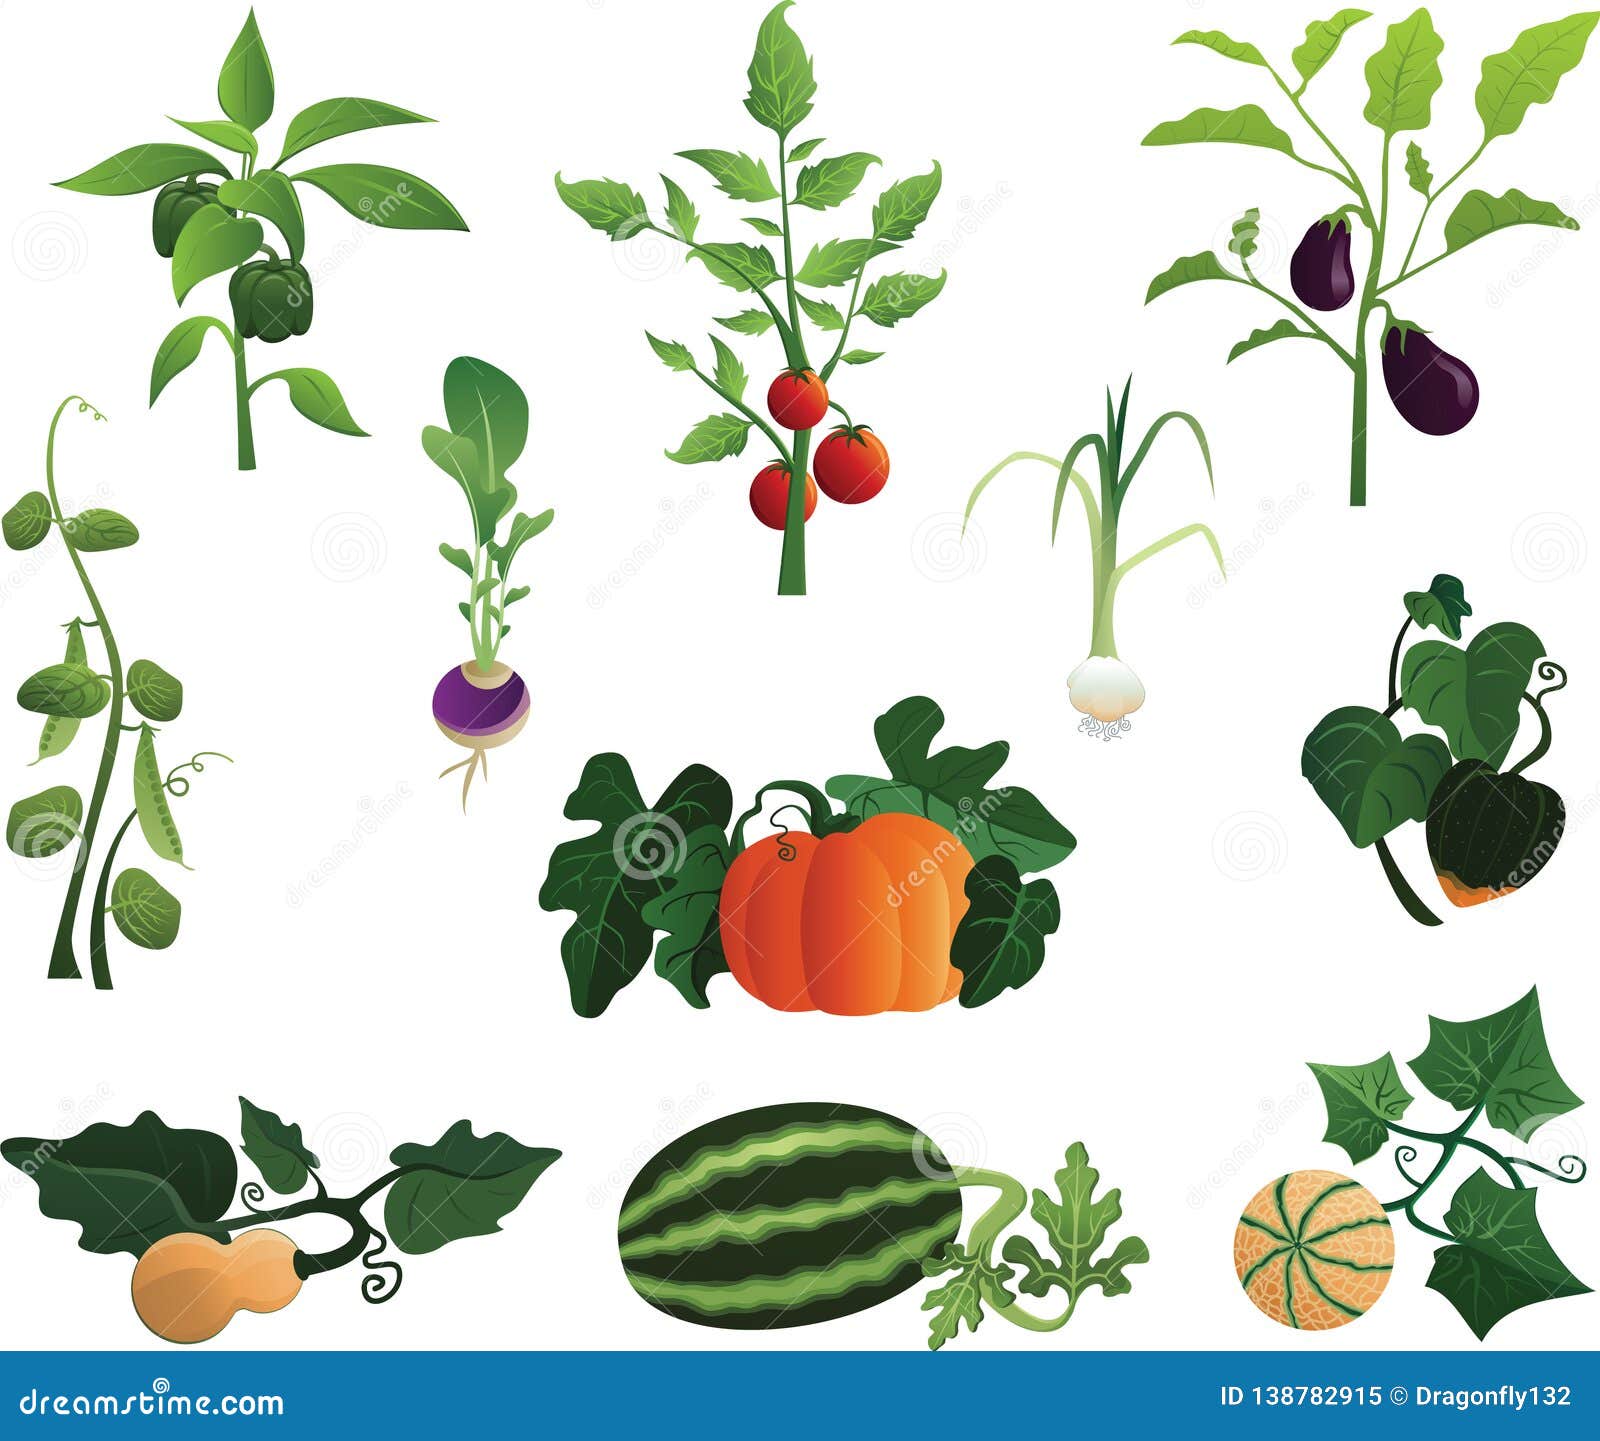 Plants from the Garden stock vector. Illustration of ...